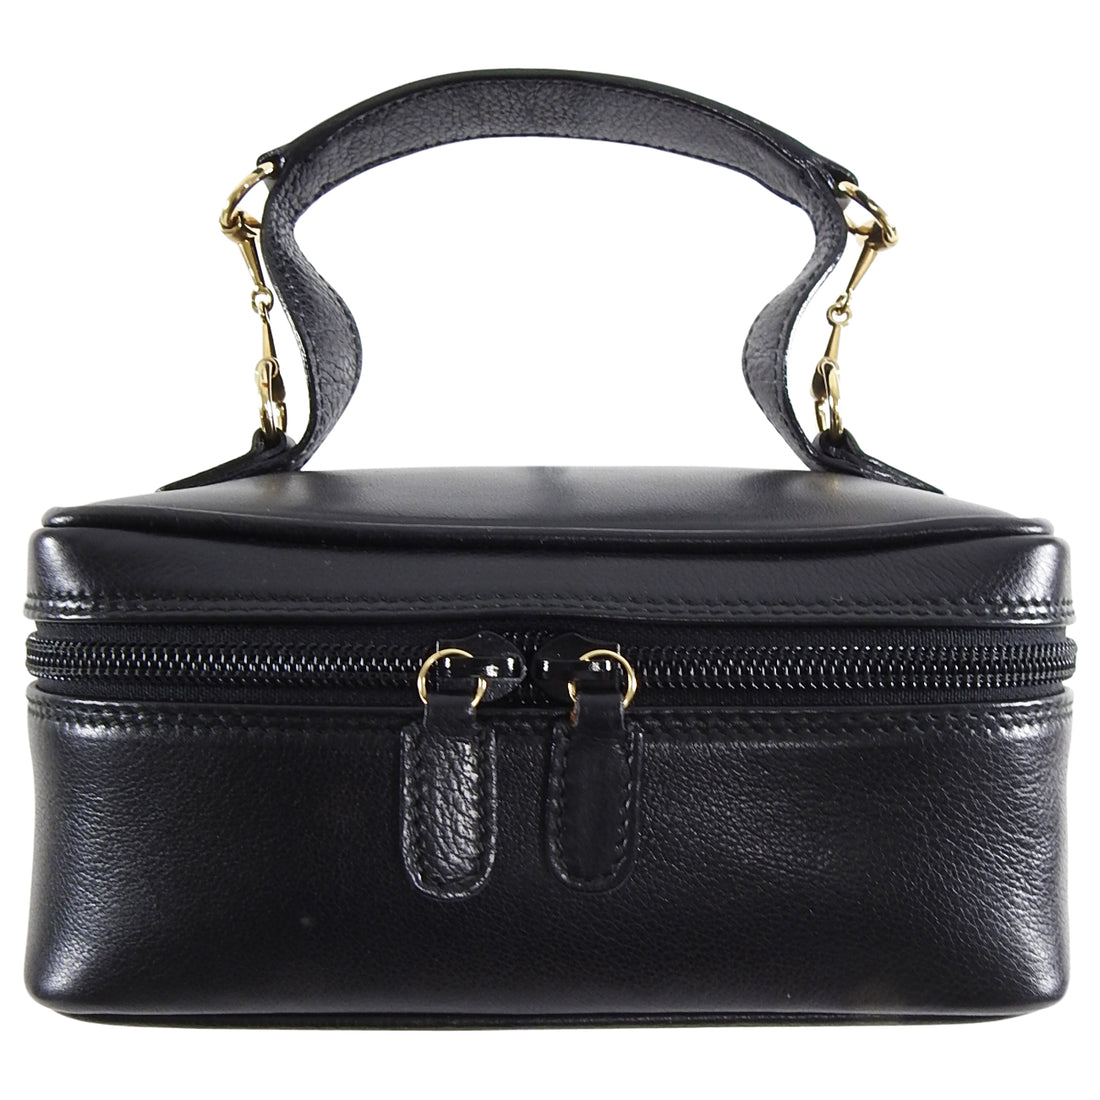 Gucci Vintage Small Black Leather Cosmetic Vanity Travel Bag – I MISS YOU VINTAGE